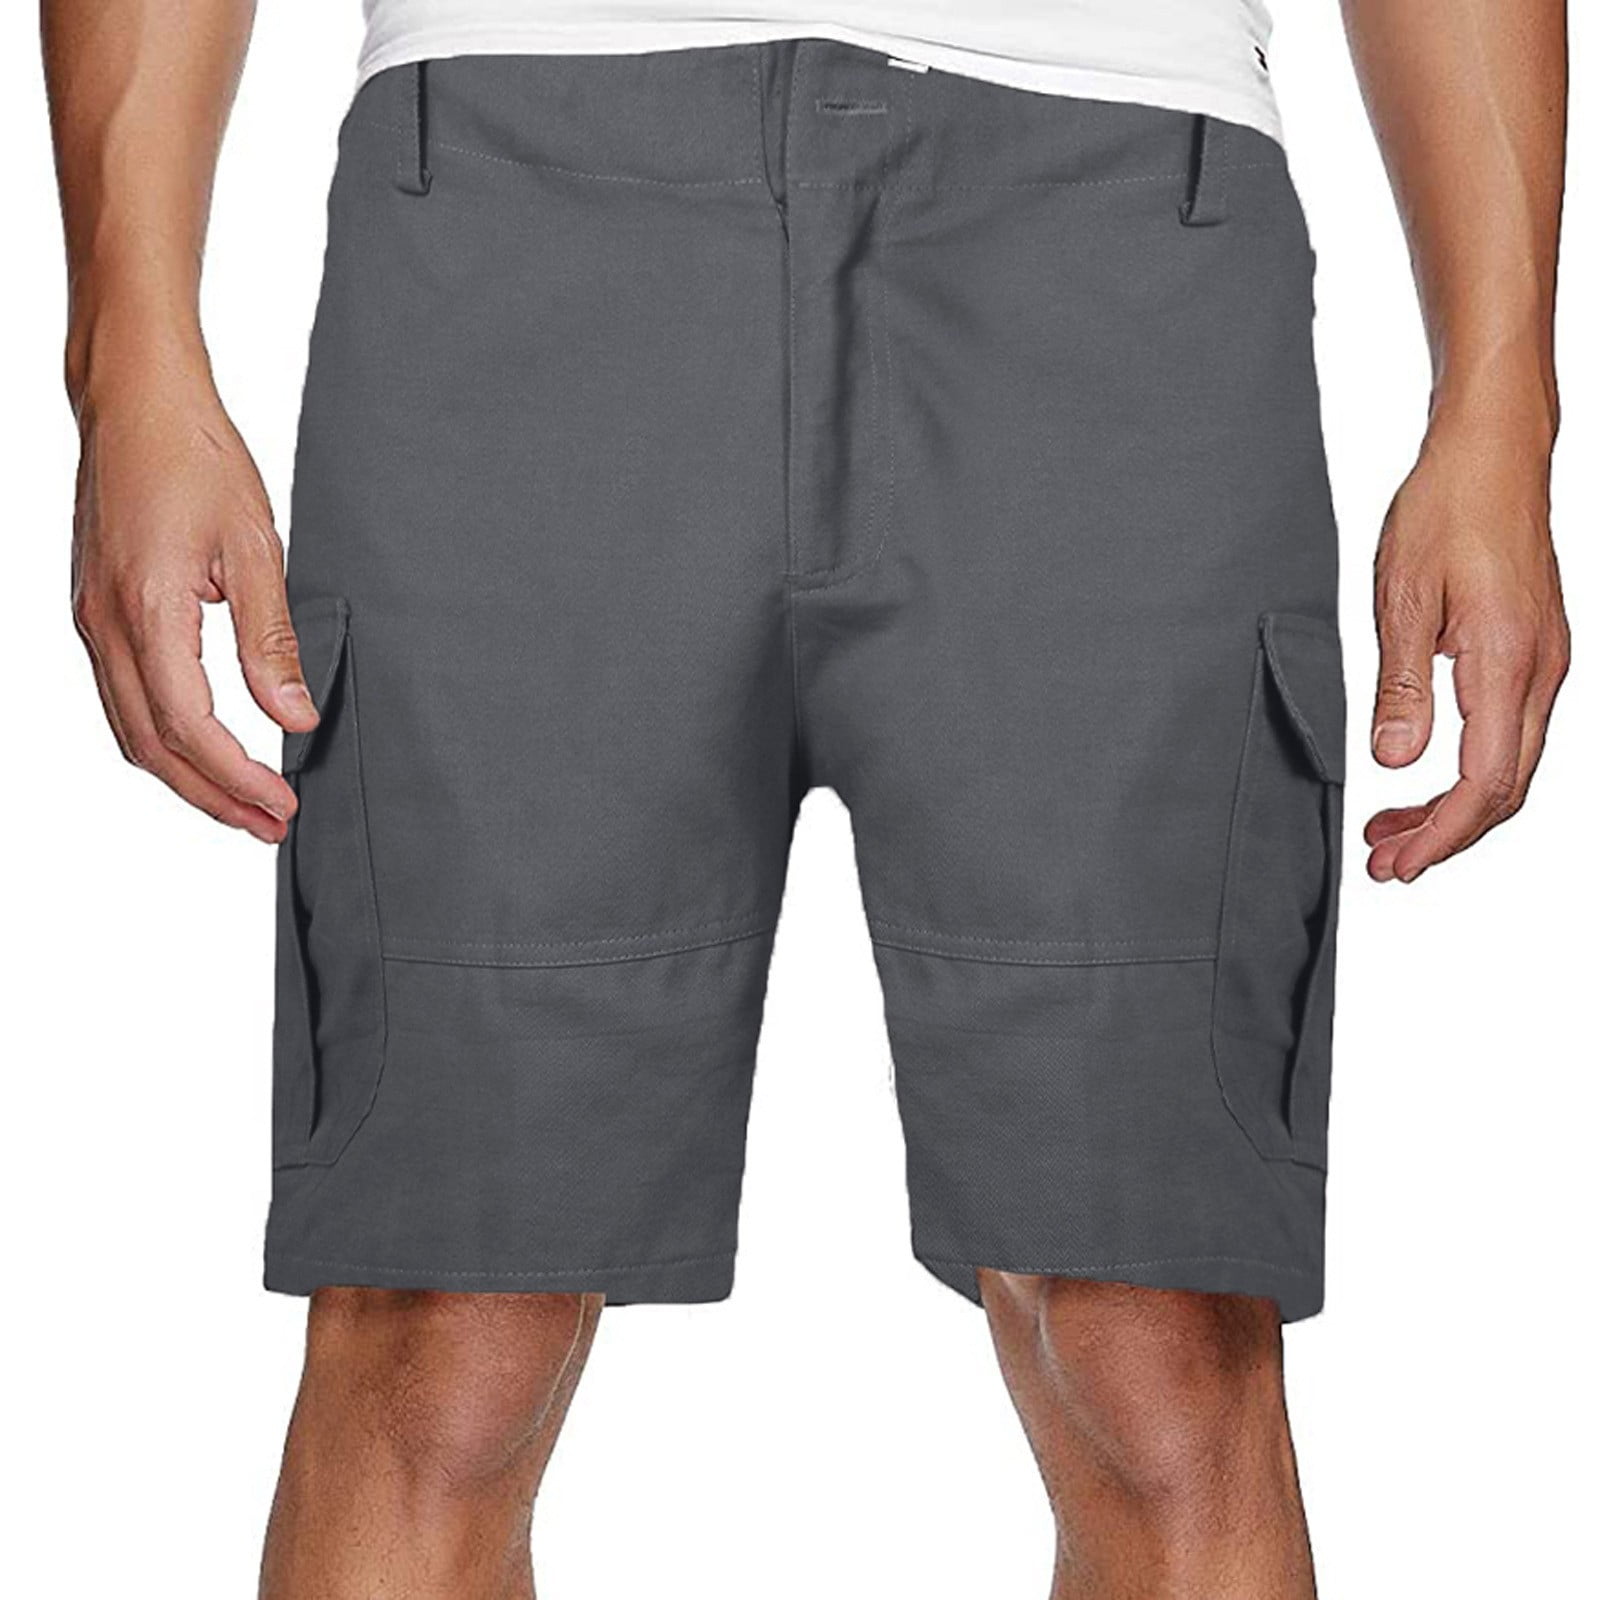 Outfmvch cargo pants for men Shorts Causual With Pockets Cargo Short ...